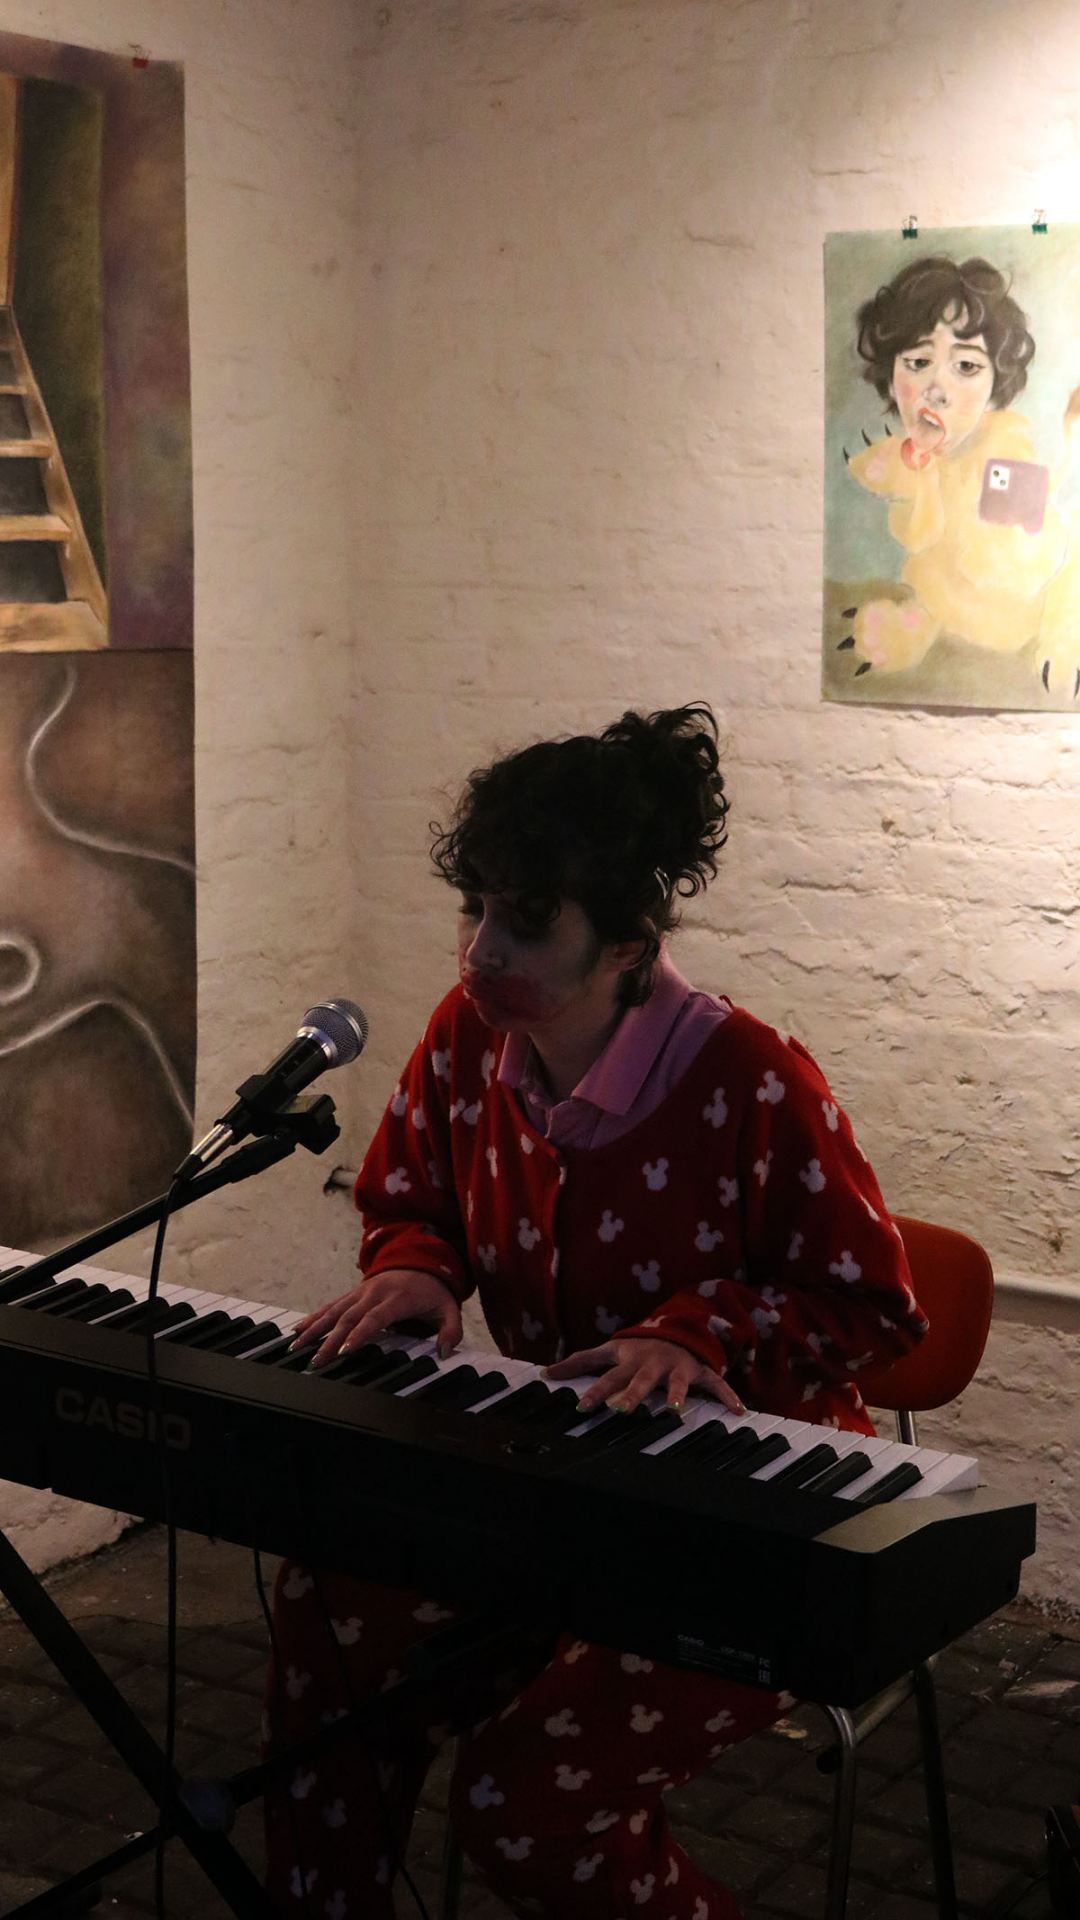 Photo of a girl sitting in a red onesie, playing a piano in front of some paintings.